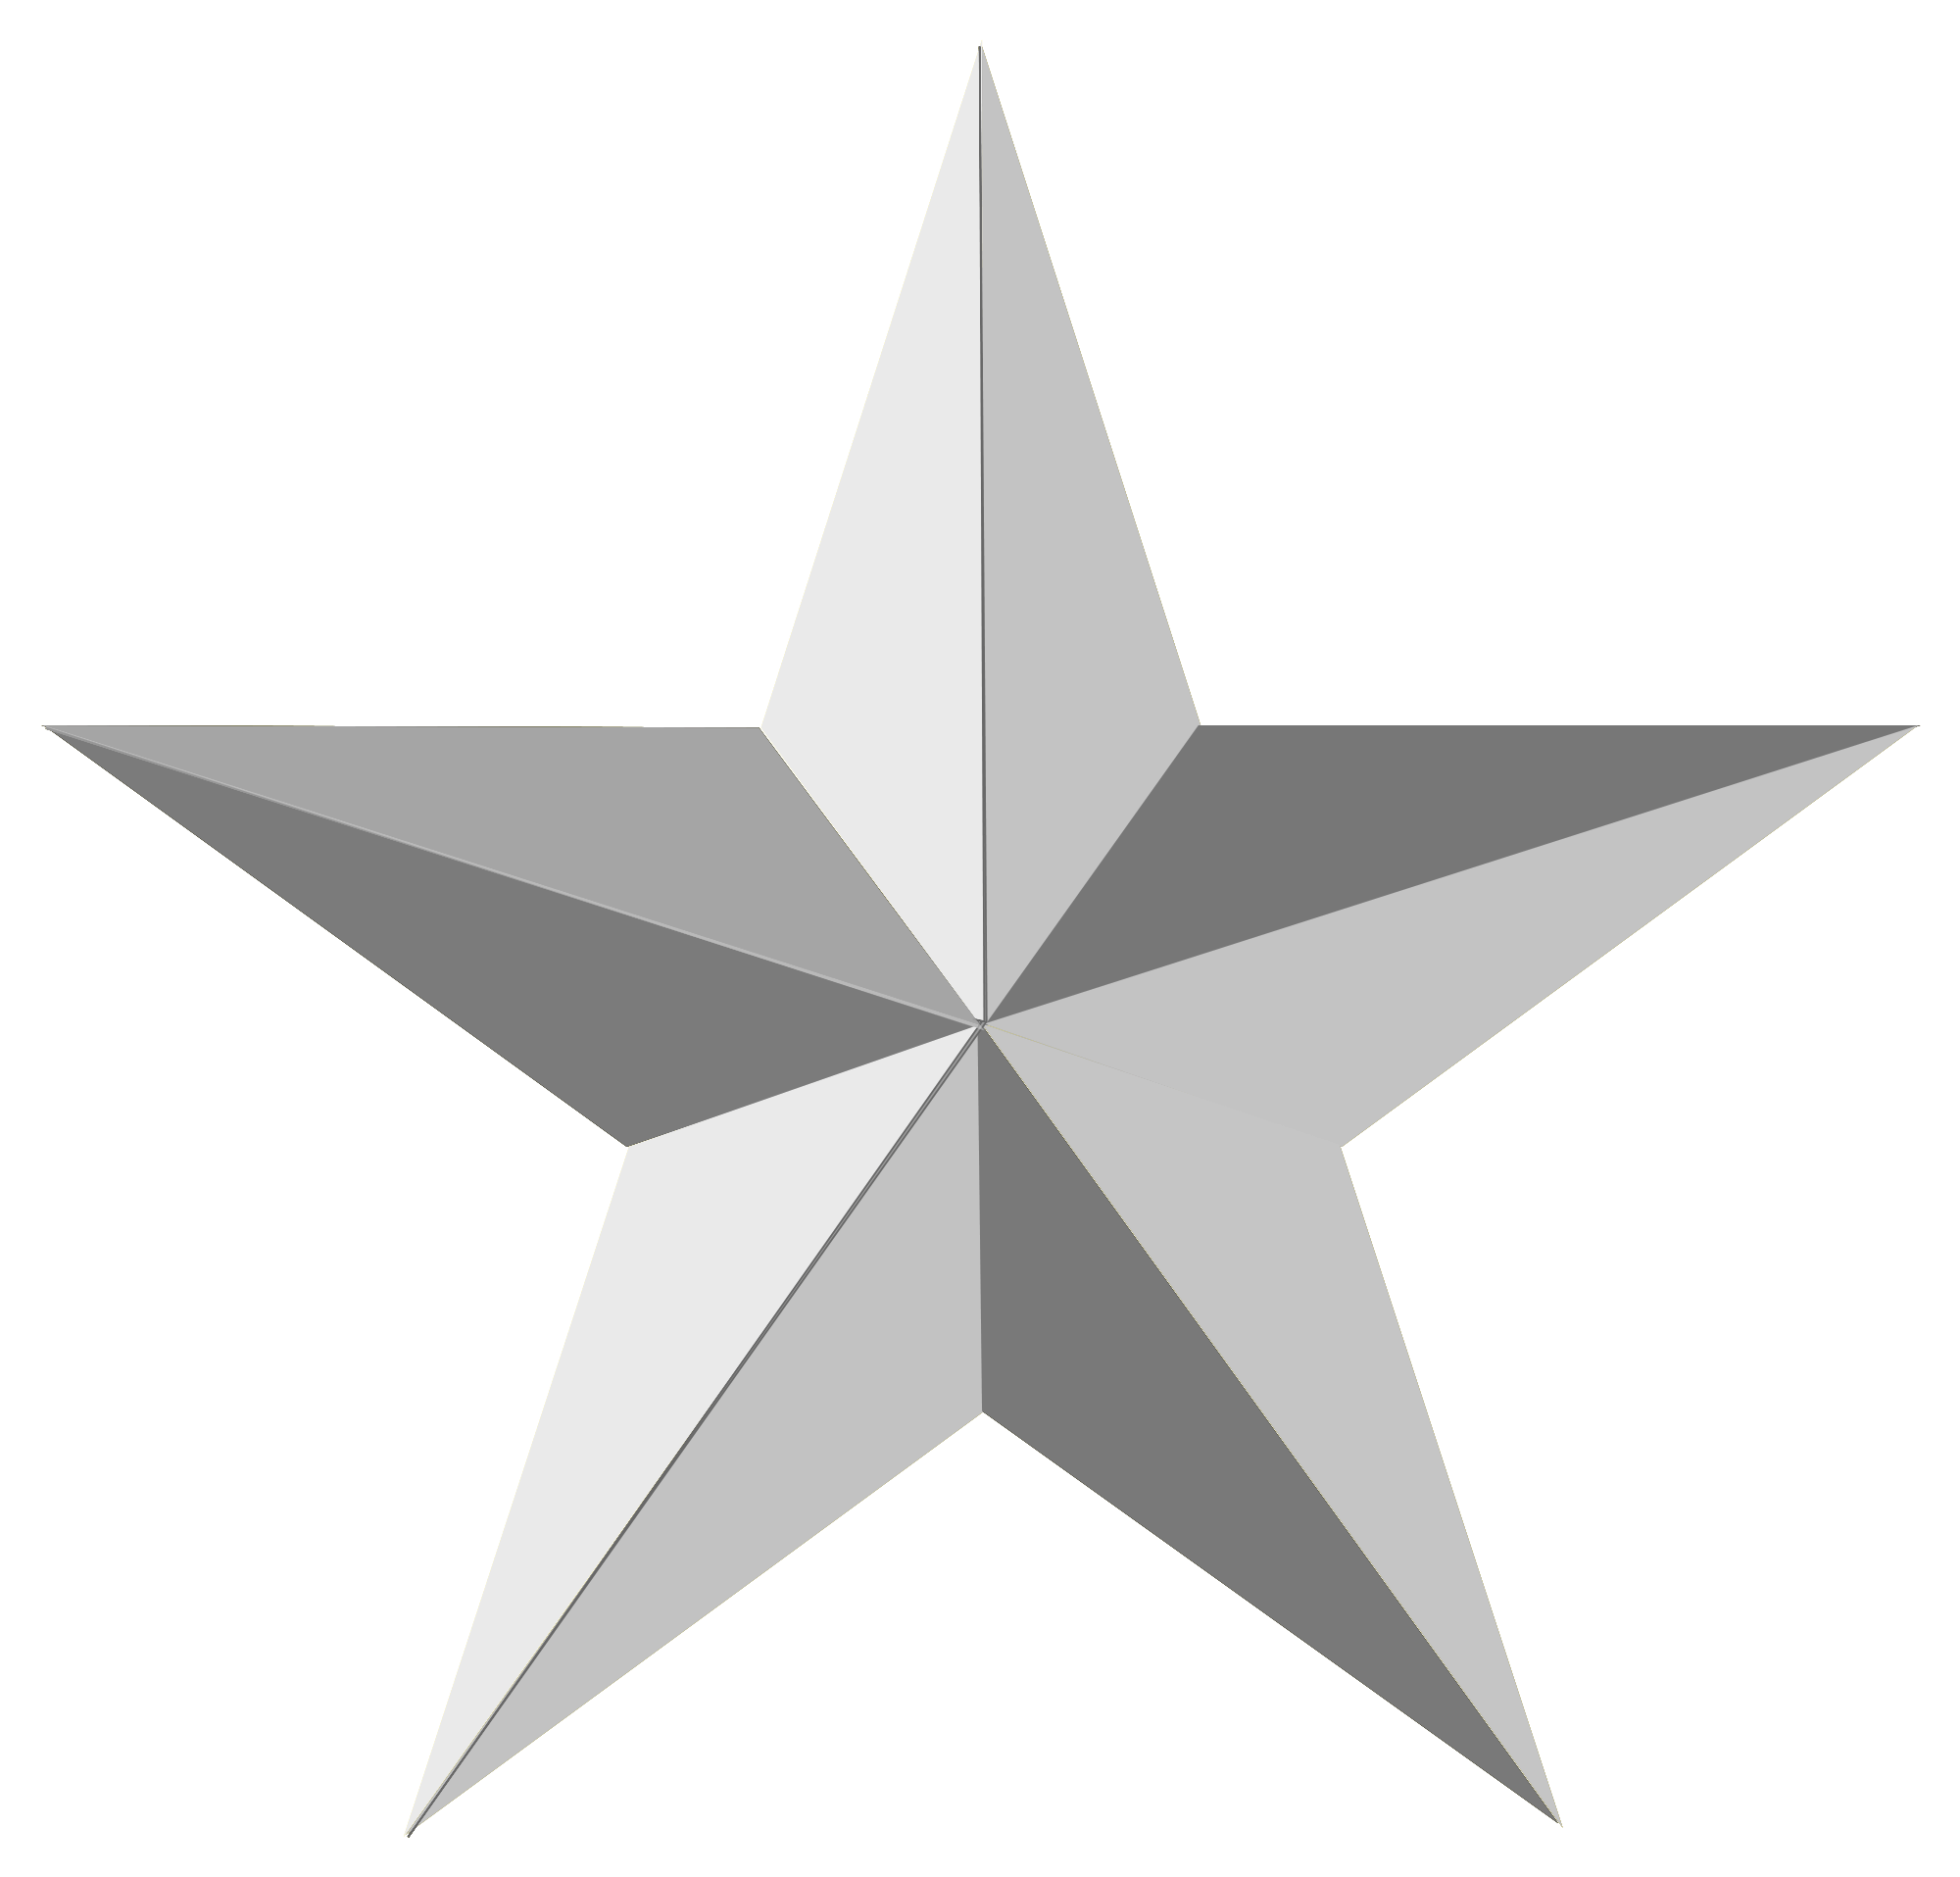 Black and White Star Logo - Star PNG image, free picture download